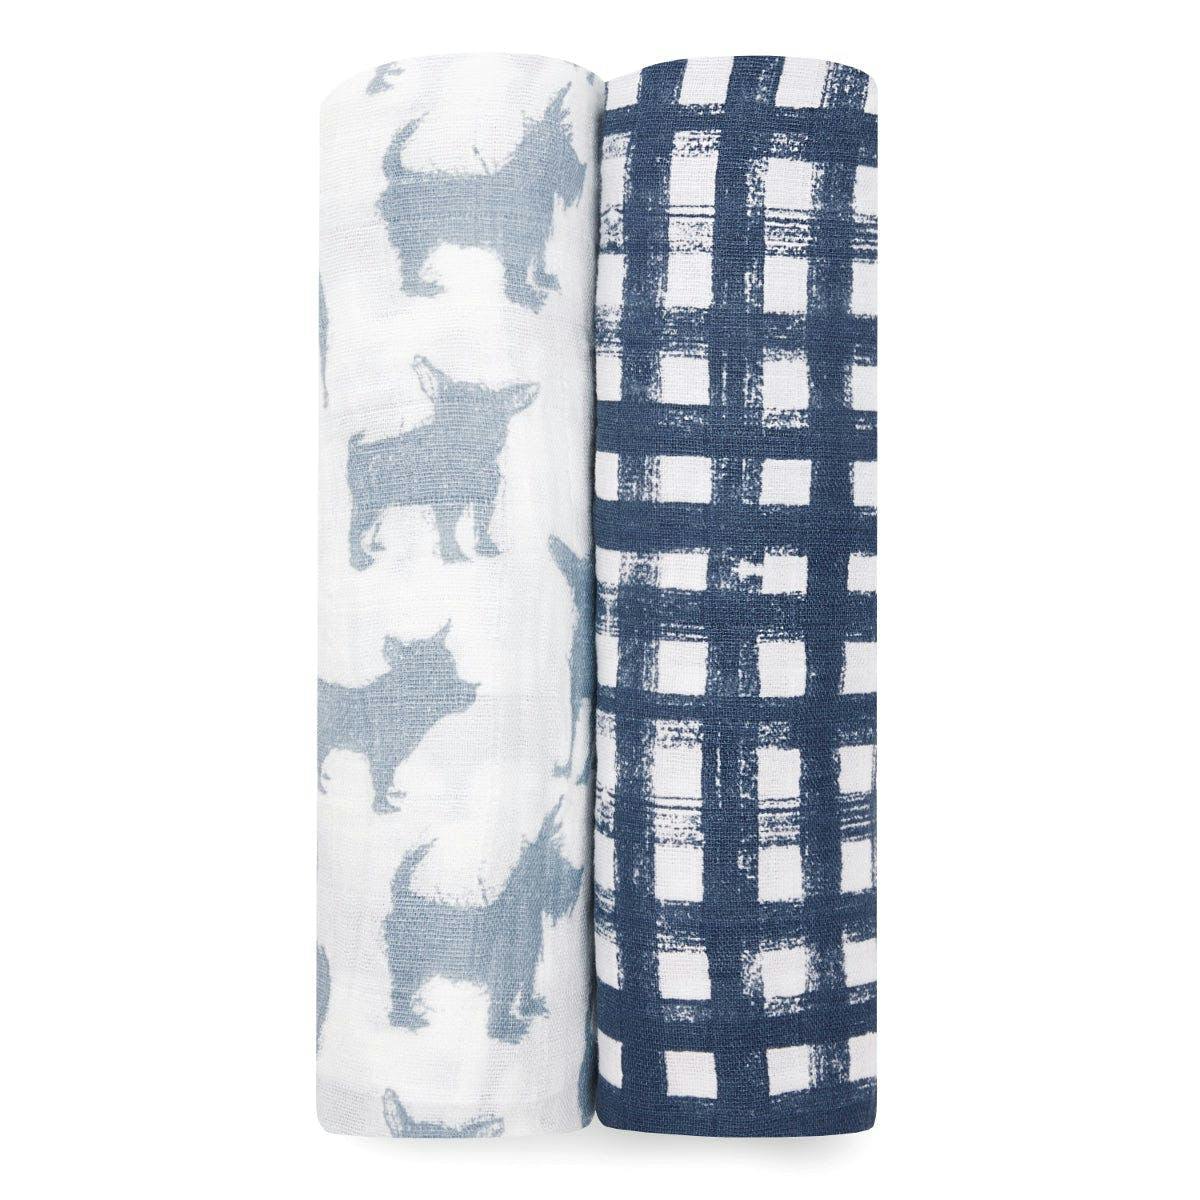 Aden + Anais Classic Muslin Swaddle Wraps 2-Pack